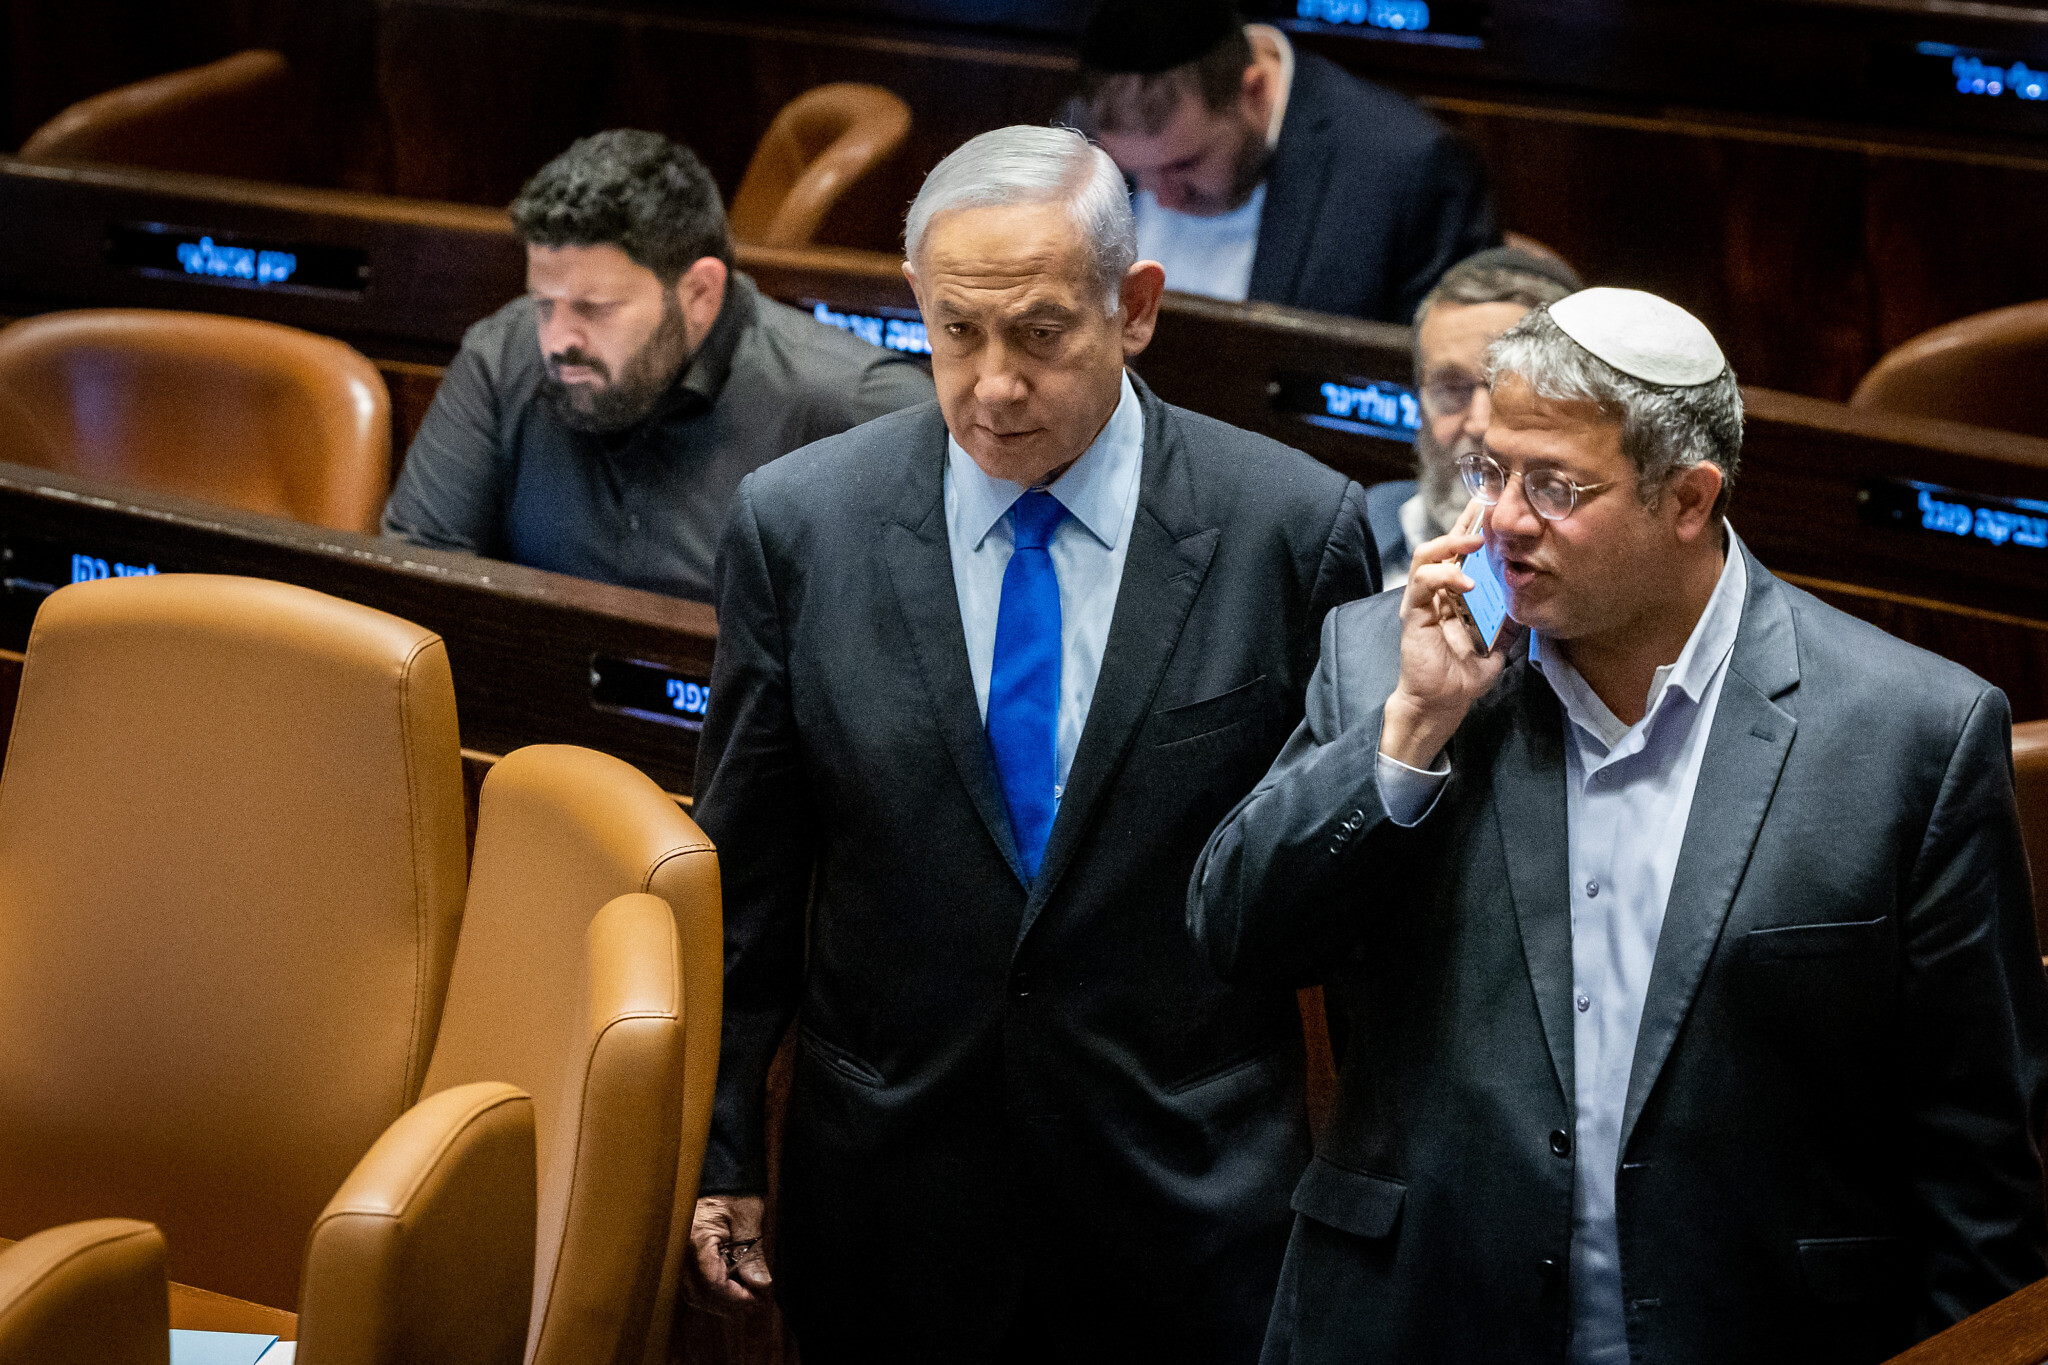 Israeli prime minister Benjamin Netanyahu with Itamar Ben-Gvir, Minister of National Security during a discussion and a vote in the assembly hall of the Knesset, the Israeli parliament in Jerusalem, on March 6, 2023. Photo by Yonatan Sindel/Flash90